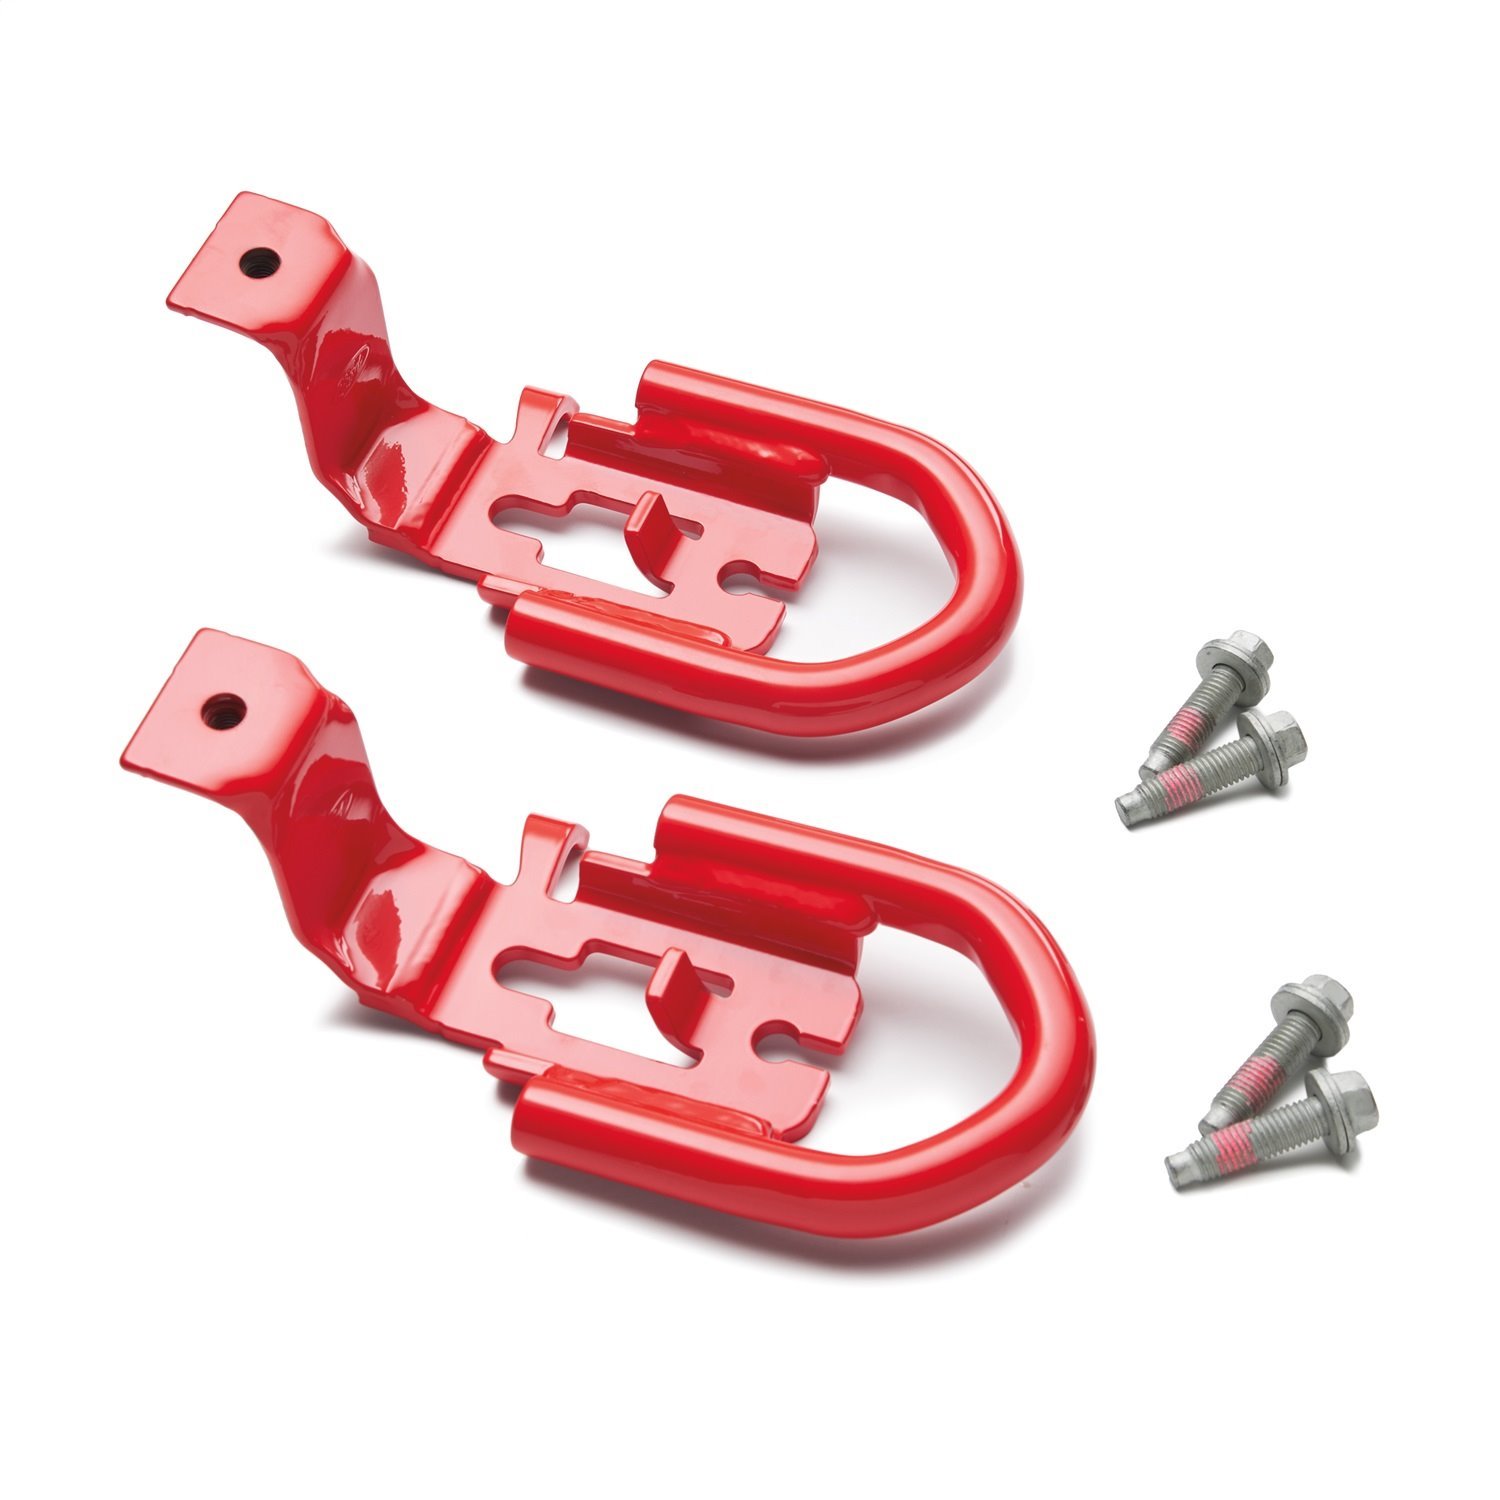 Ford Racing M-18954-RA - 2019 Ford Ranger Front Tow Hooks - Pair - Red